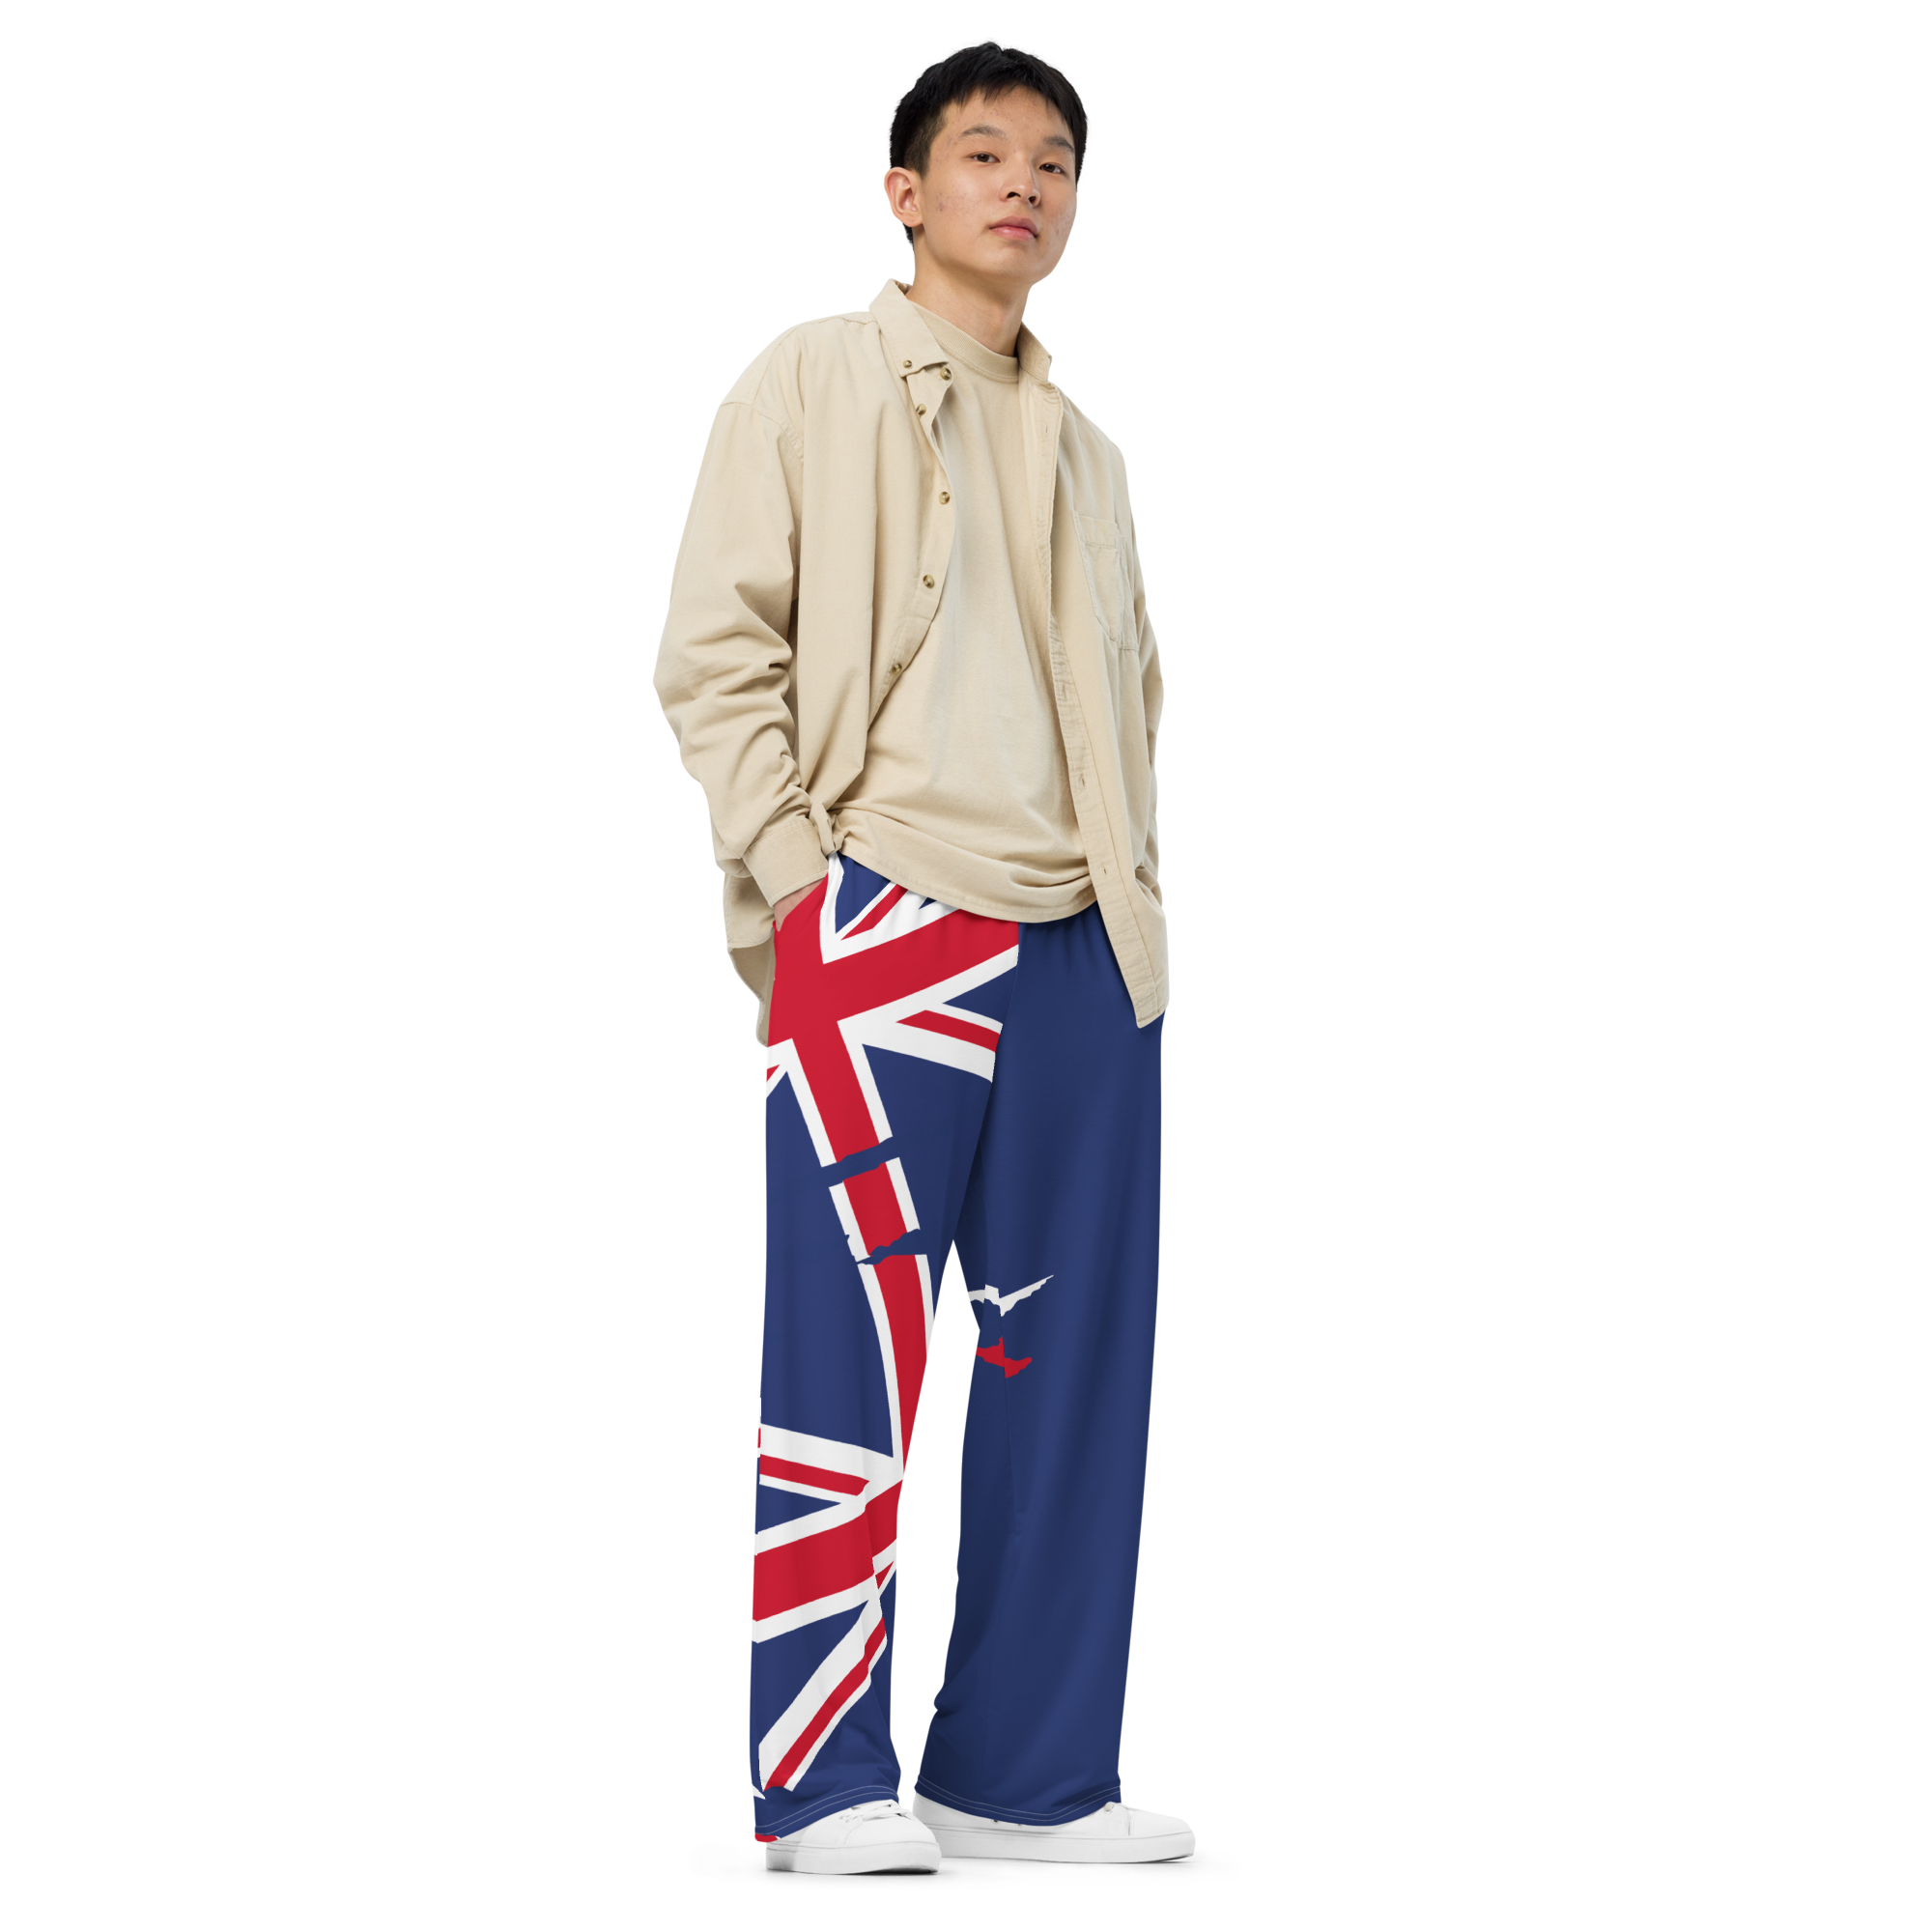 Good Bye To Flannel Volleyball Pants Hello To New Volleyball PJ Pants: These England flag inspired blue and white wide leg athletic pants are available now on Etsy.